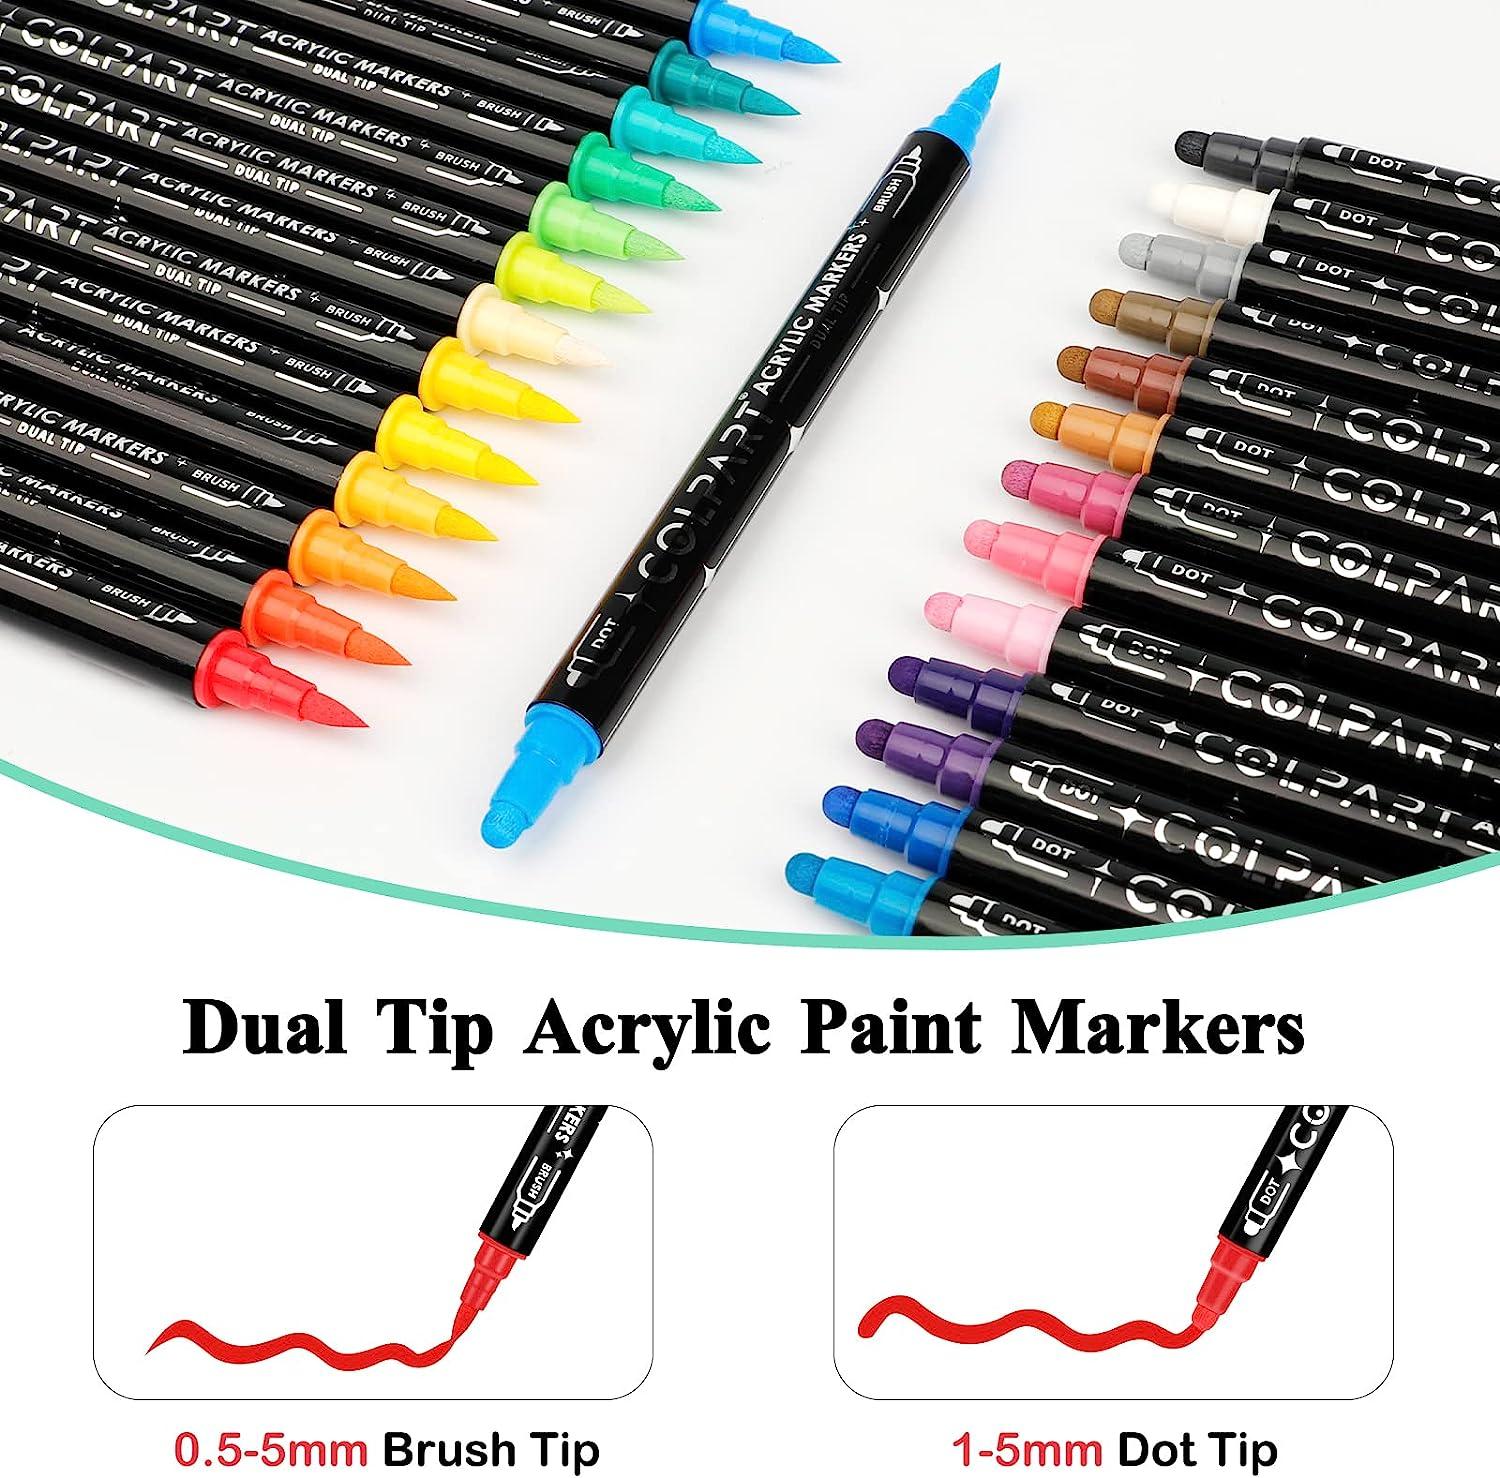 24 COLOUR DUAL TIP ACRYLIC PAINT MARKERS FINE TIP & DOT TIP at Rs